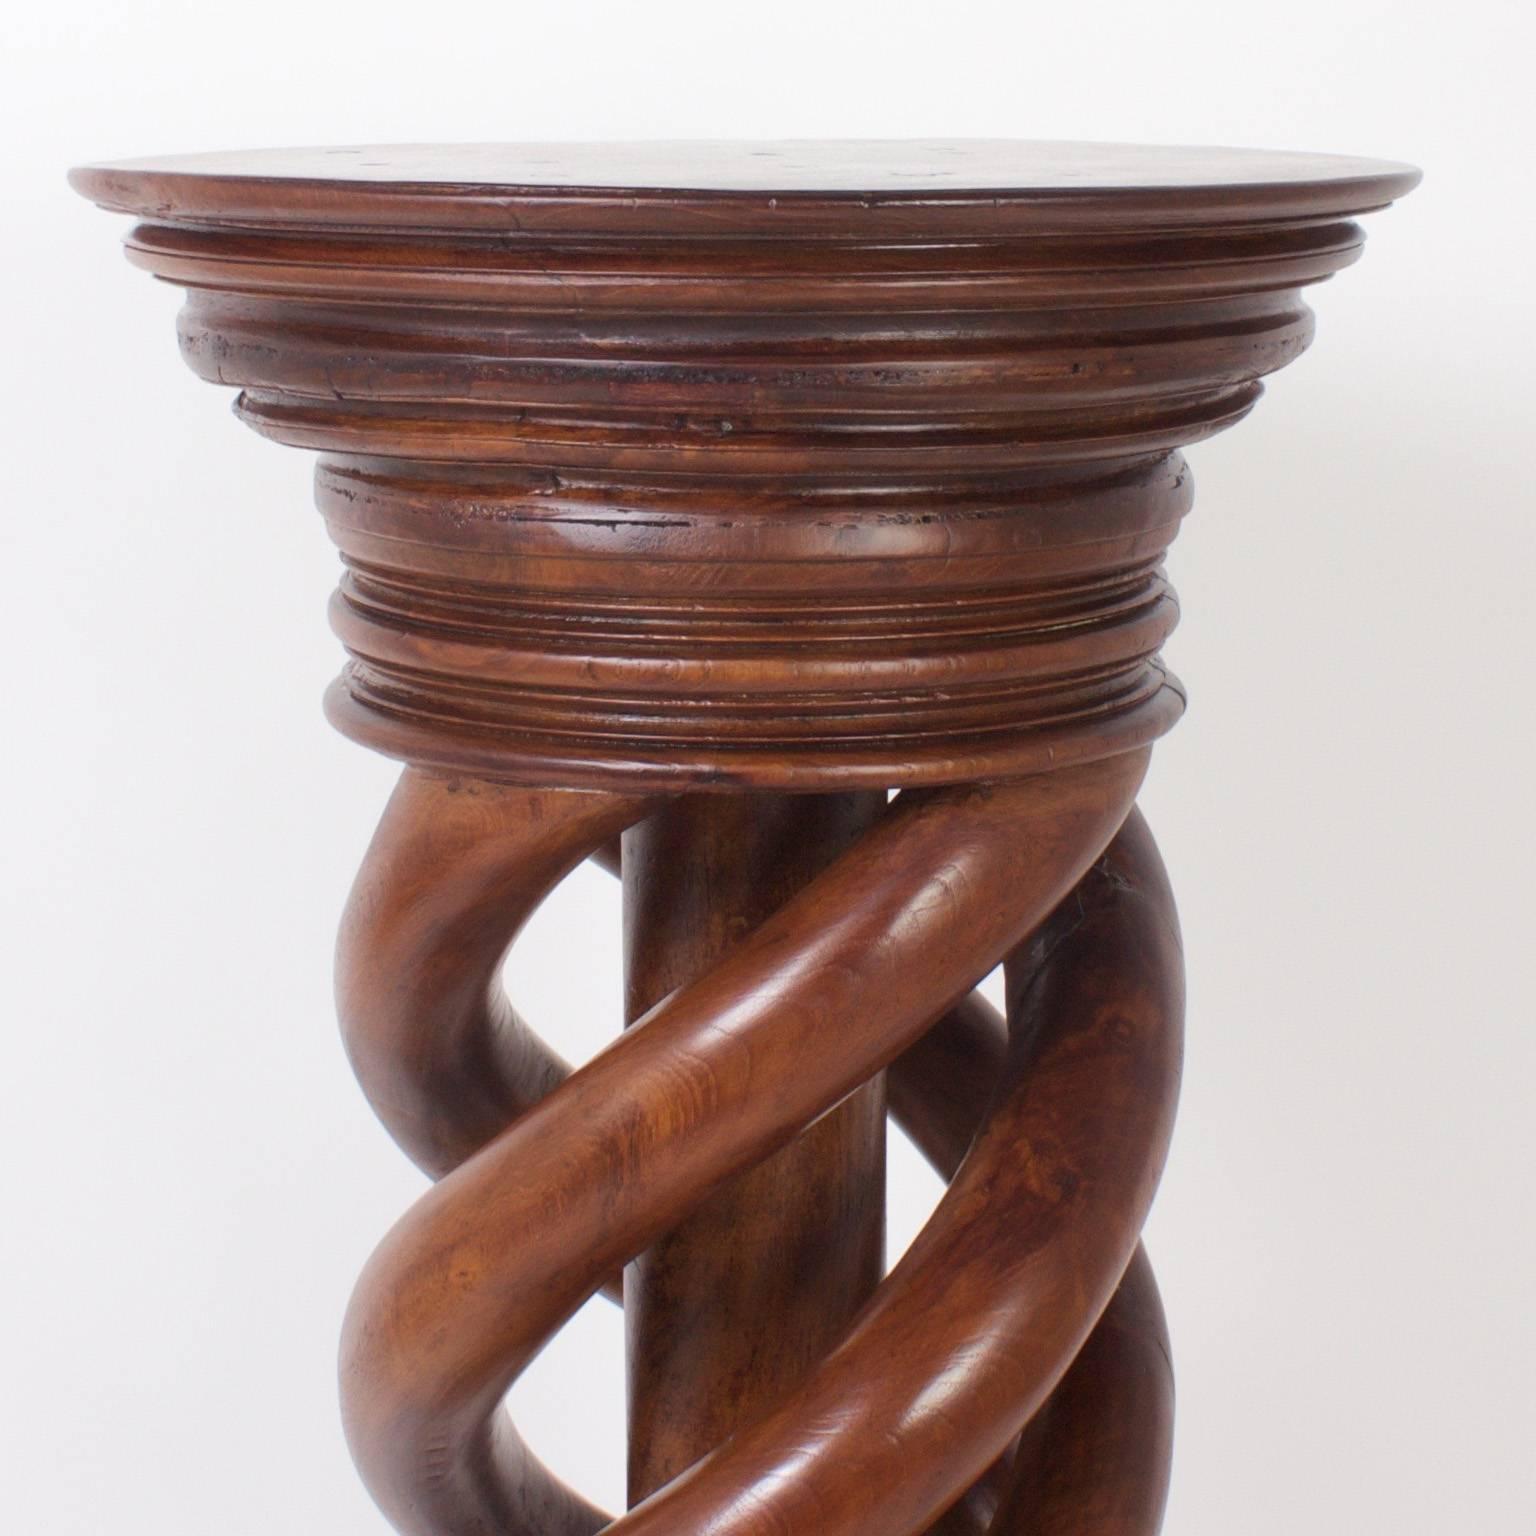 Rugged, antique pedestal with a helix twist design that defies comparison. The stand is ambitiously carved from mahogany and features a multi layered turned capital and plinth. The large-scale and expert craftsmanship make this a rare and impressive